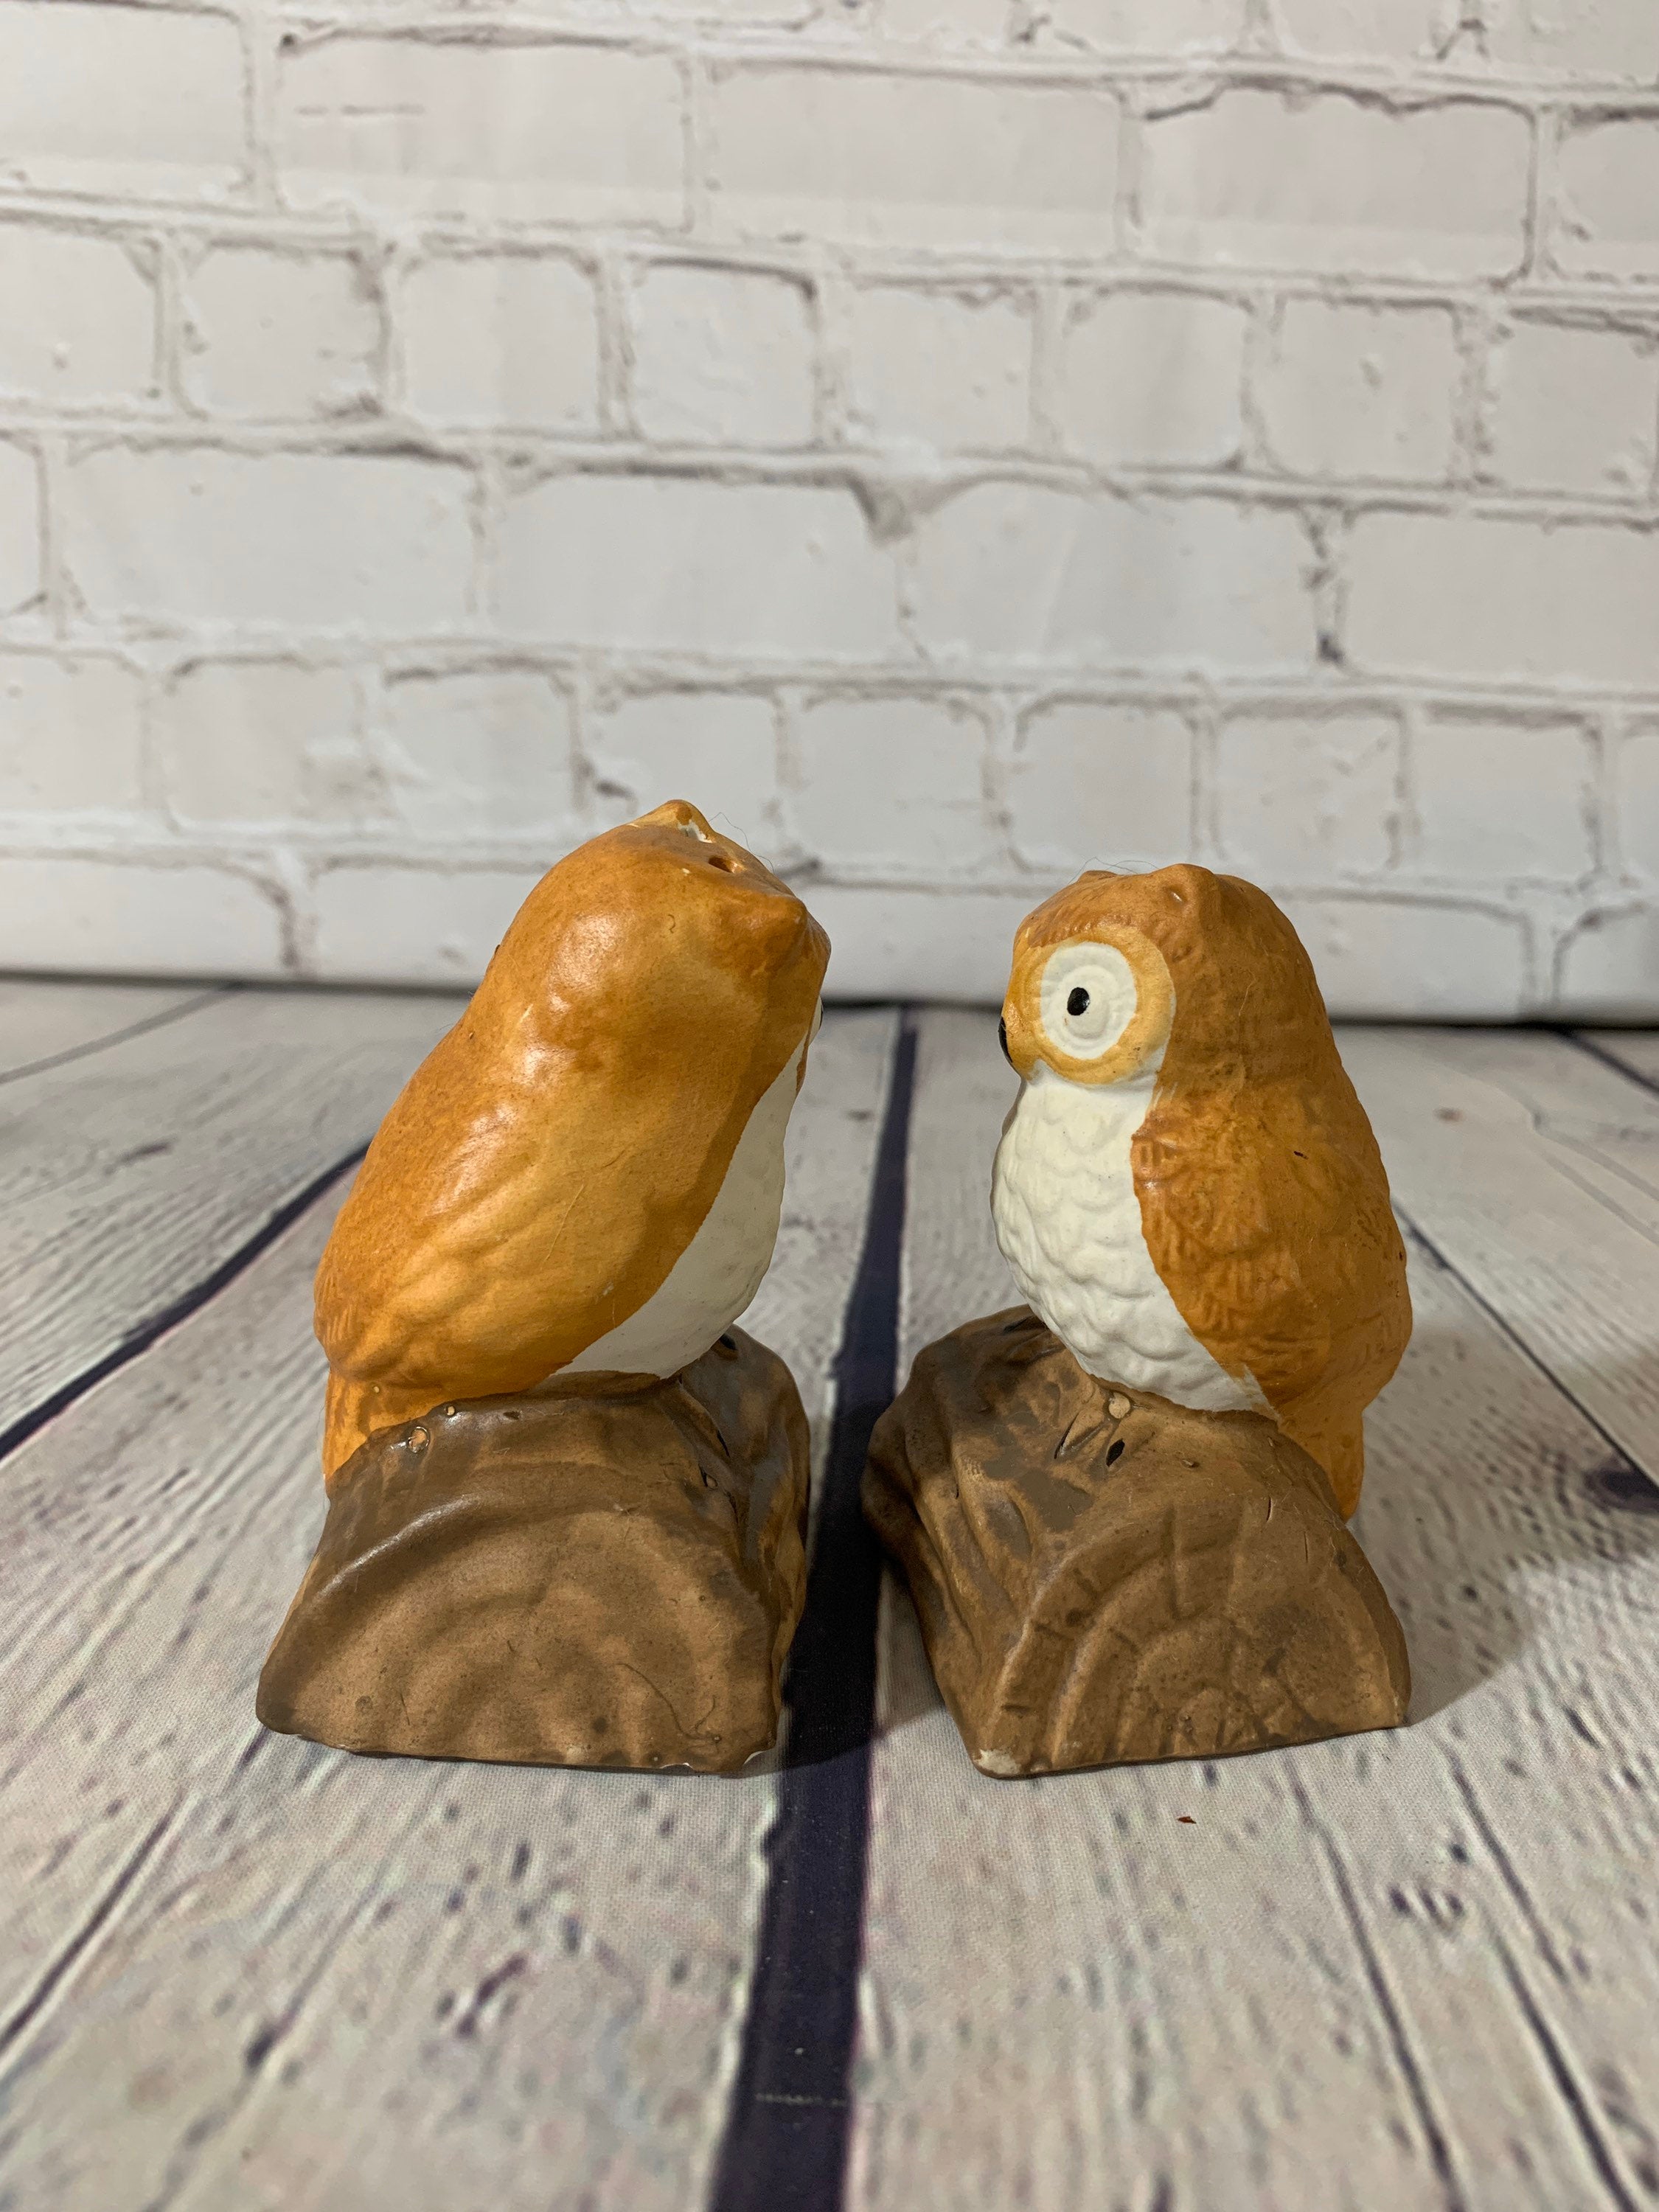 Vintage Ceramic Owls on a Tree Branch Salt & Pepper Shakers- Taiwan 1970’s